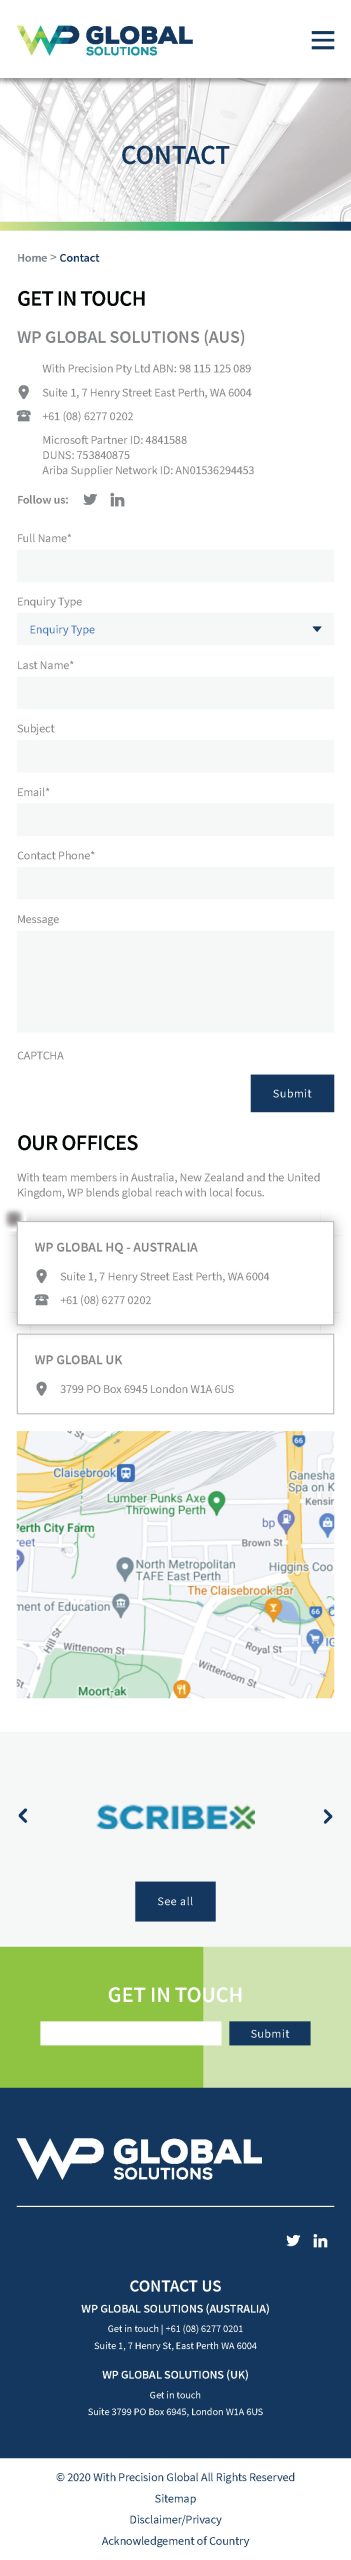 BEVIN CREATIVE – Contact – WP Global Solutions